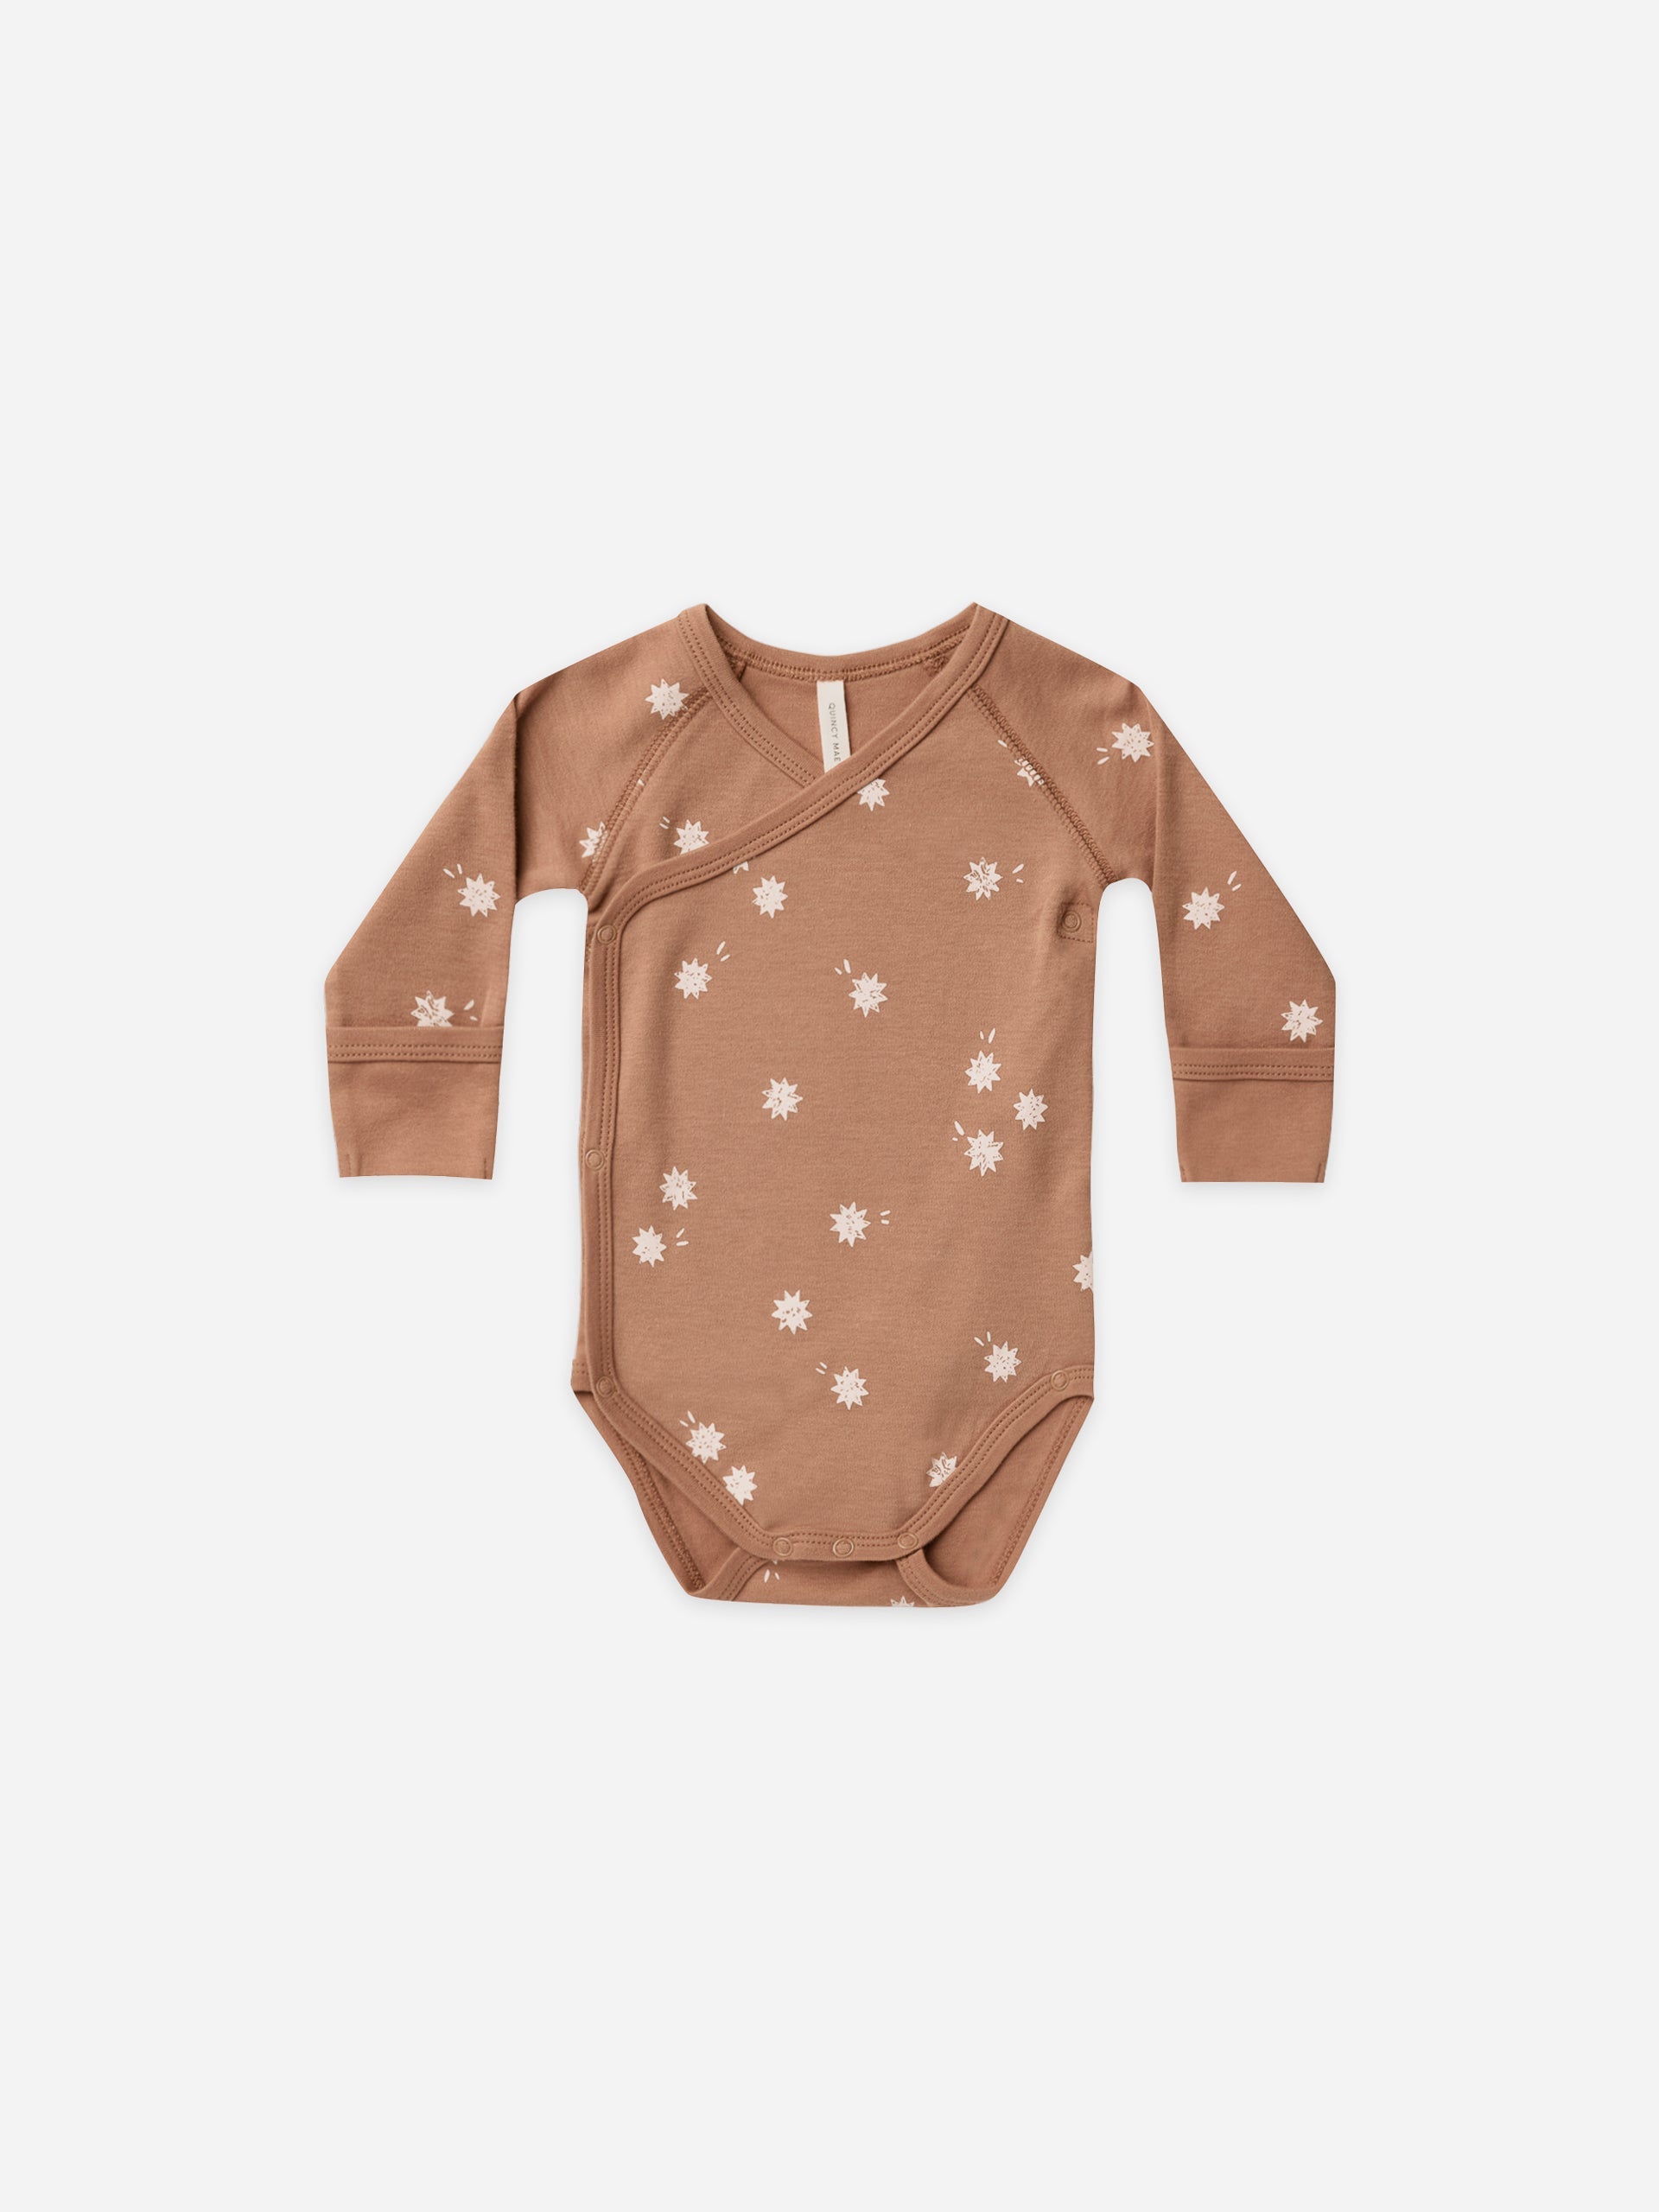 side snap bodysuit | sunburst - Quincy Mae | Baby Basics | Baby Clothing | Organic Baby Clothes | Modern Baby Boy Clothes |